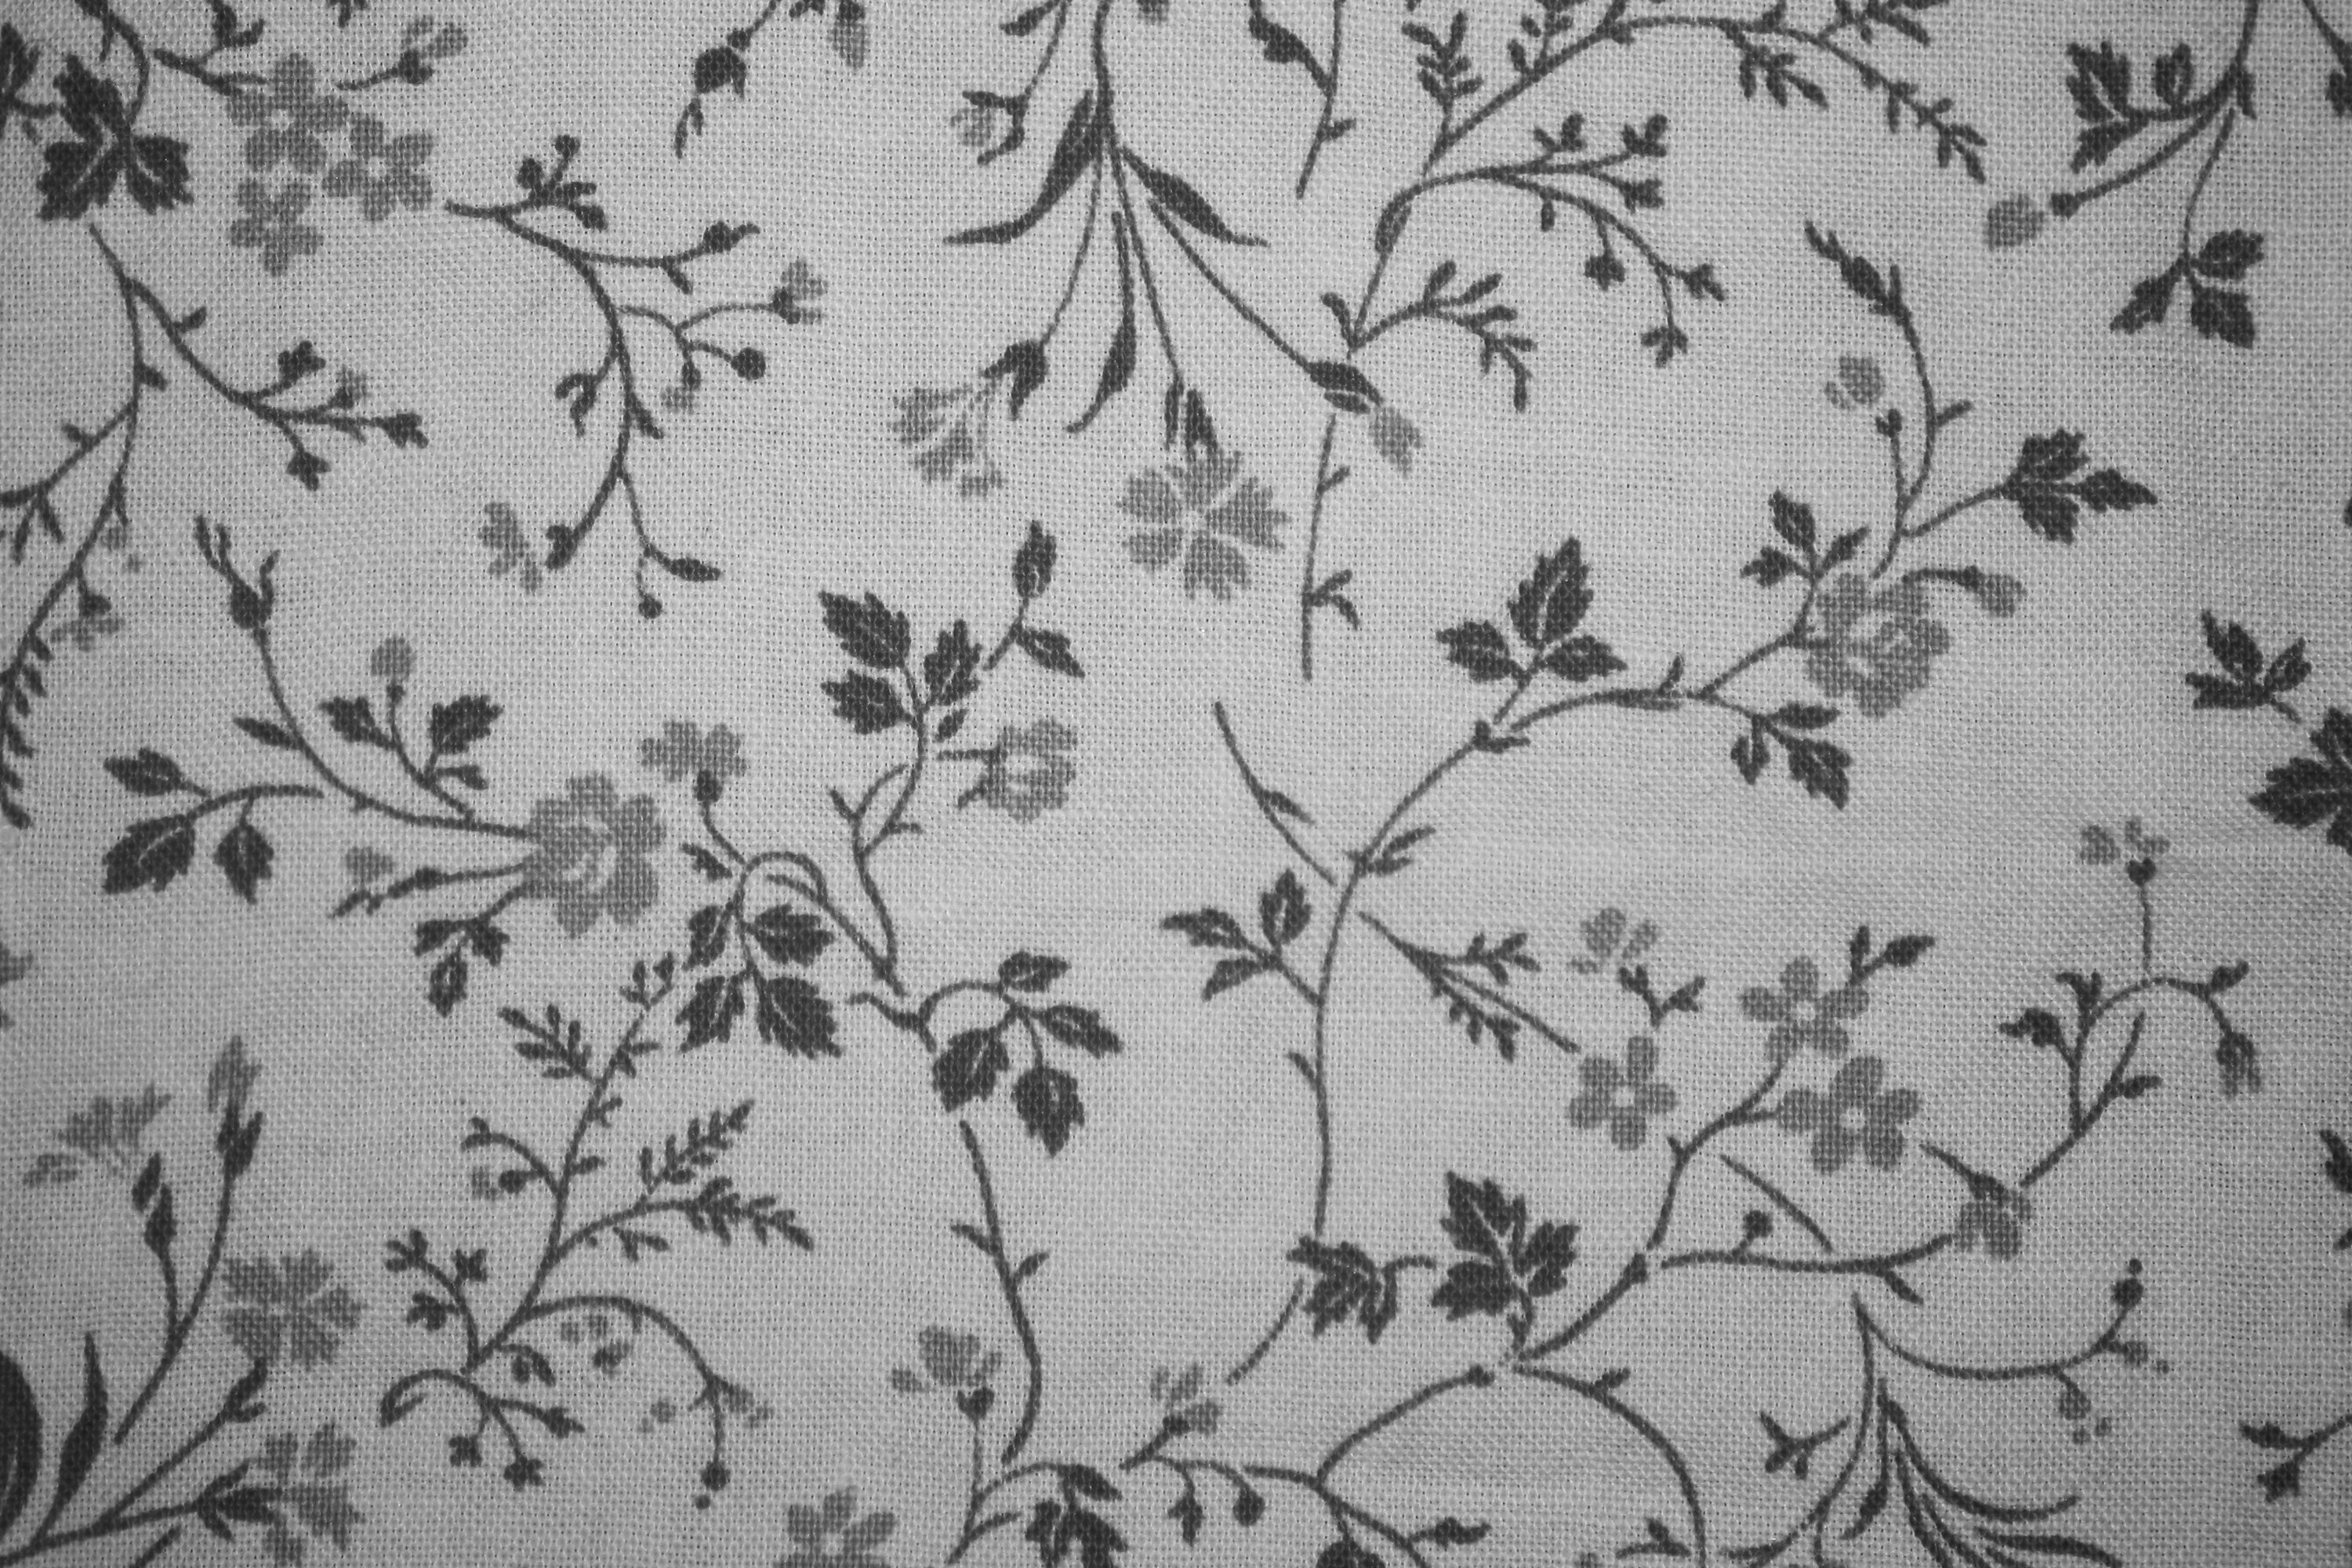 Gray on White Floral Print Fabric Texture   Free High Resolution Photo